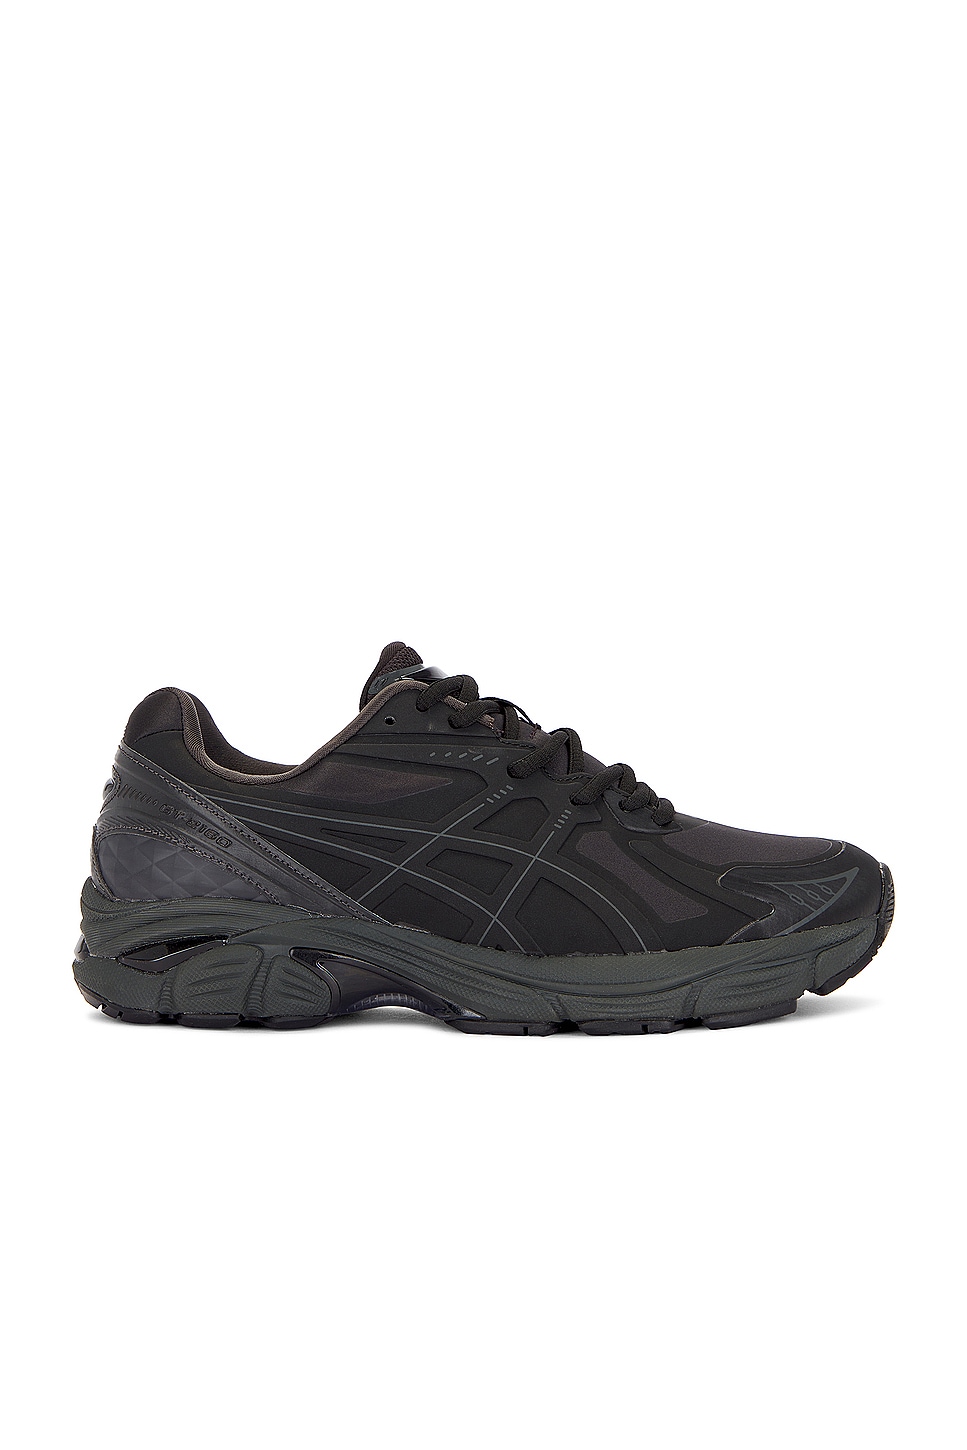 Image 1 of Asics Gt-2160 Ns Earthenware Pack in Black & Graphite Grey